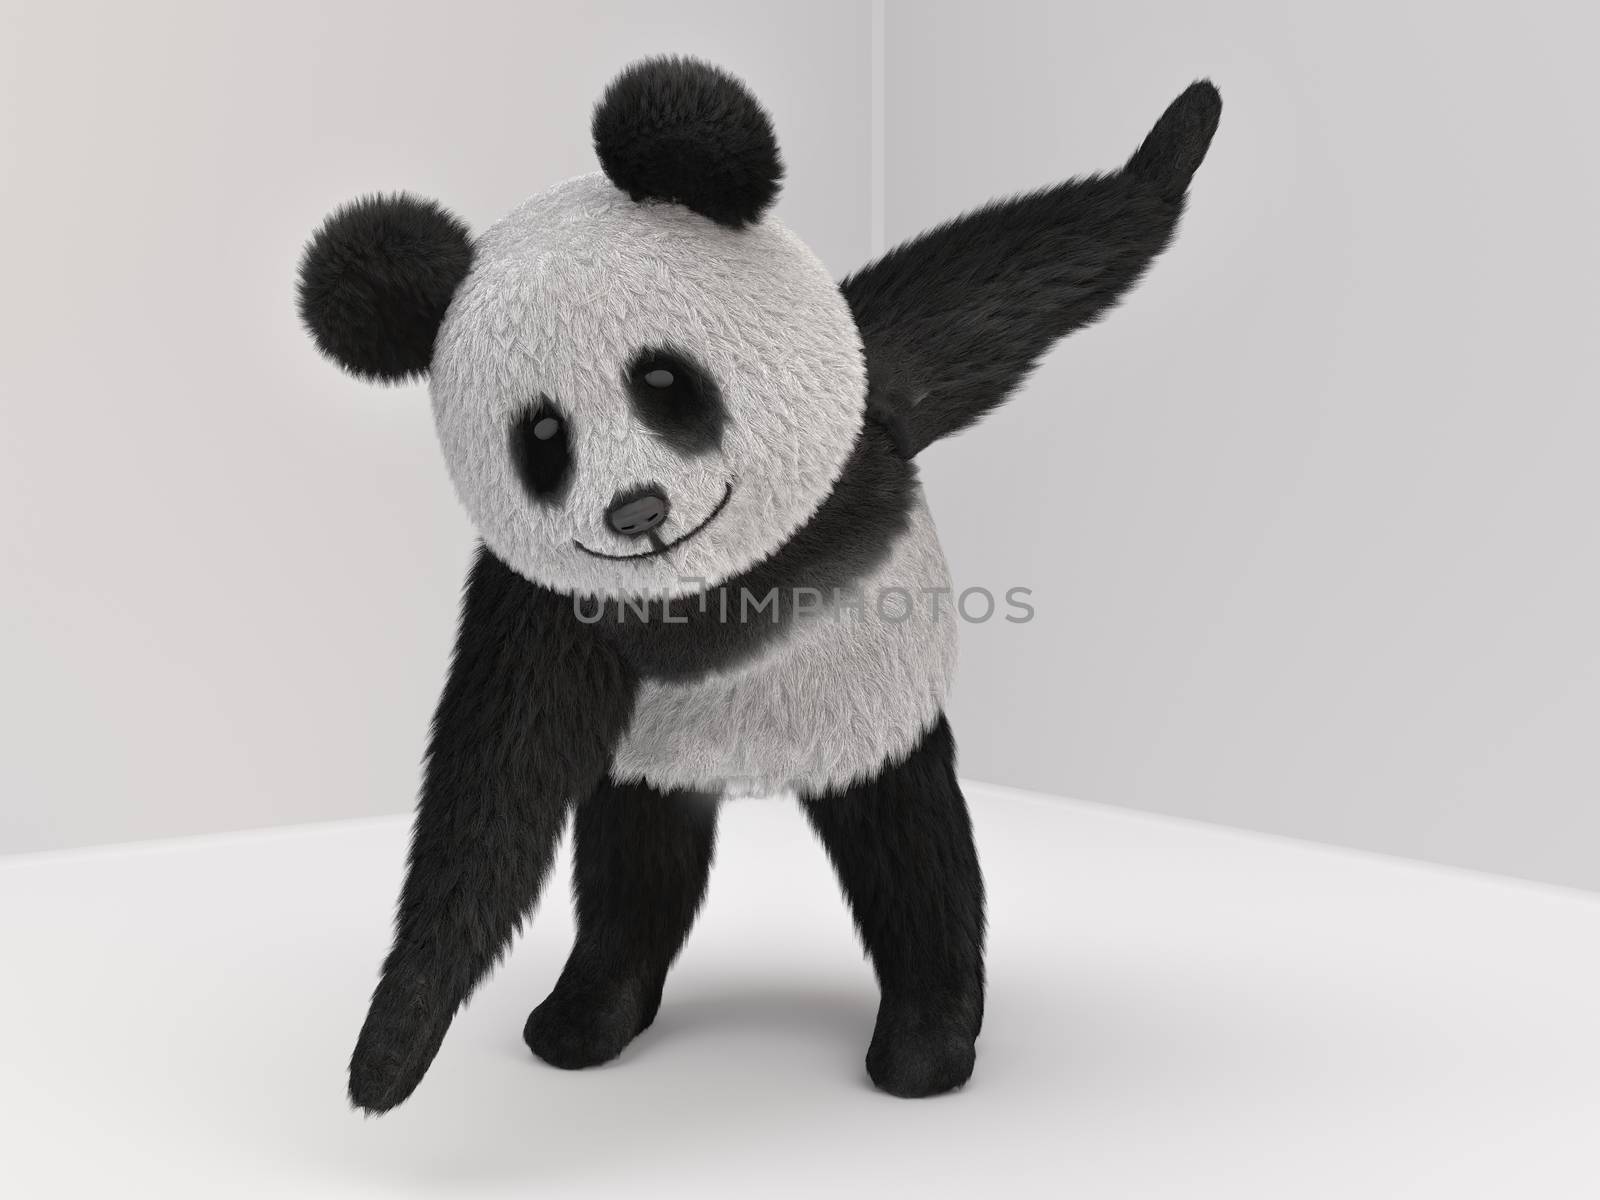 fluffy three-dimensional panda has been a warm-up, leaning with one hand down